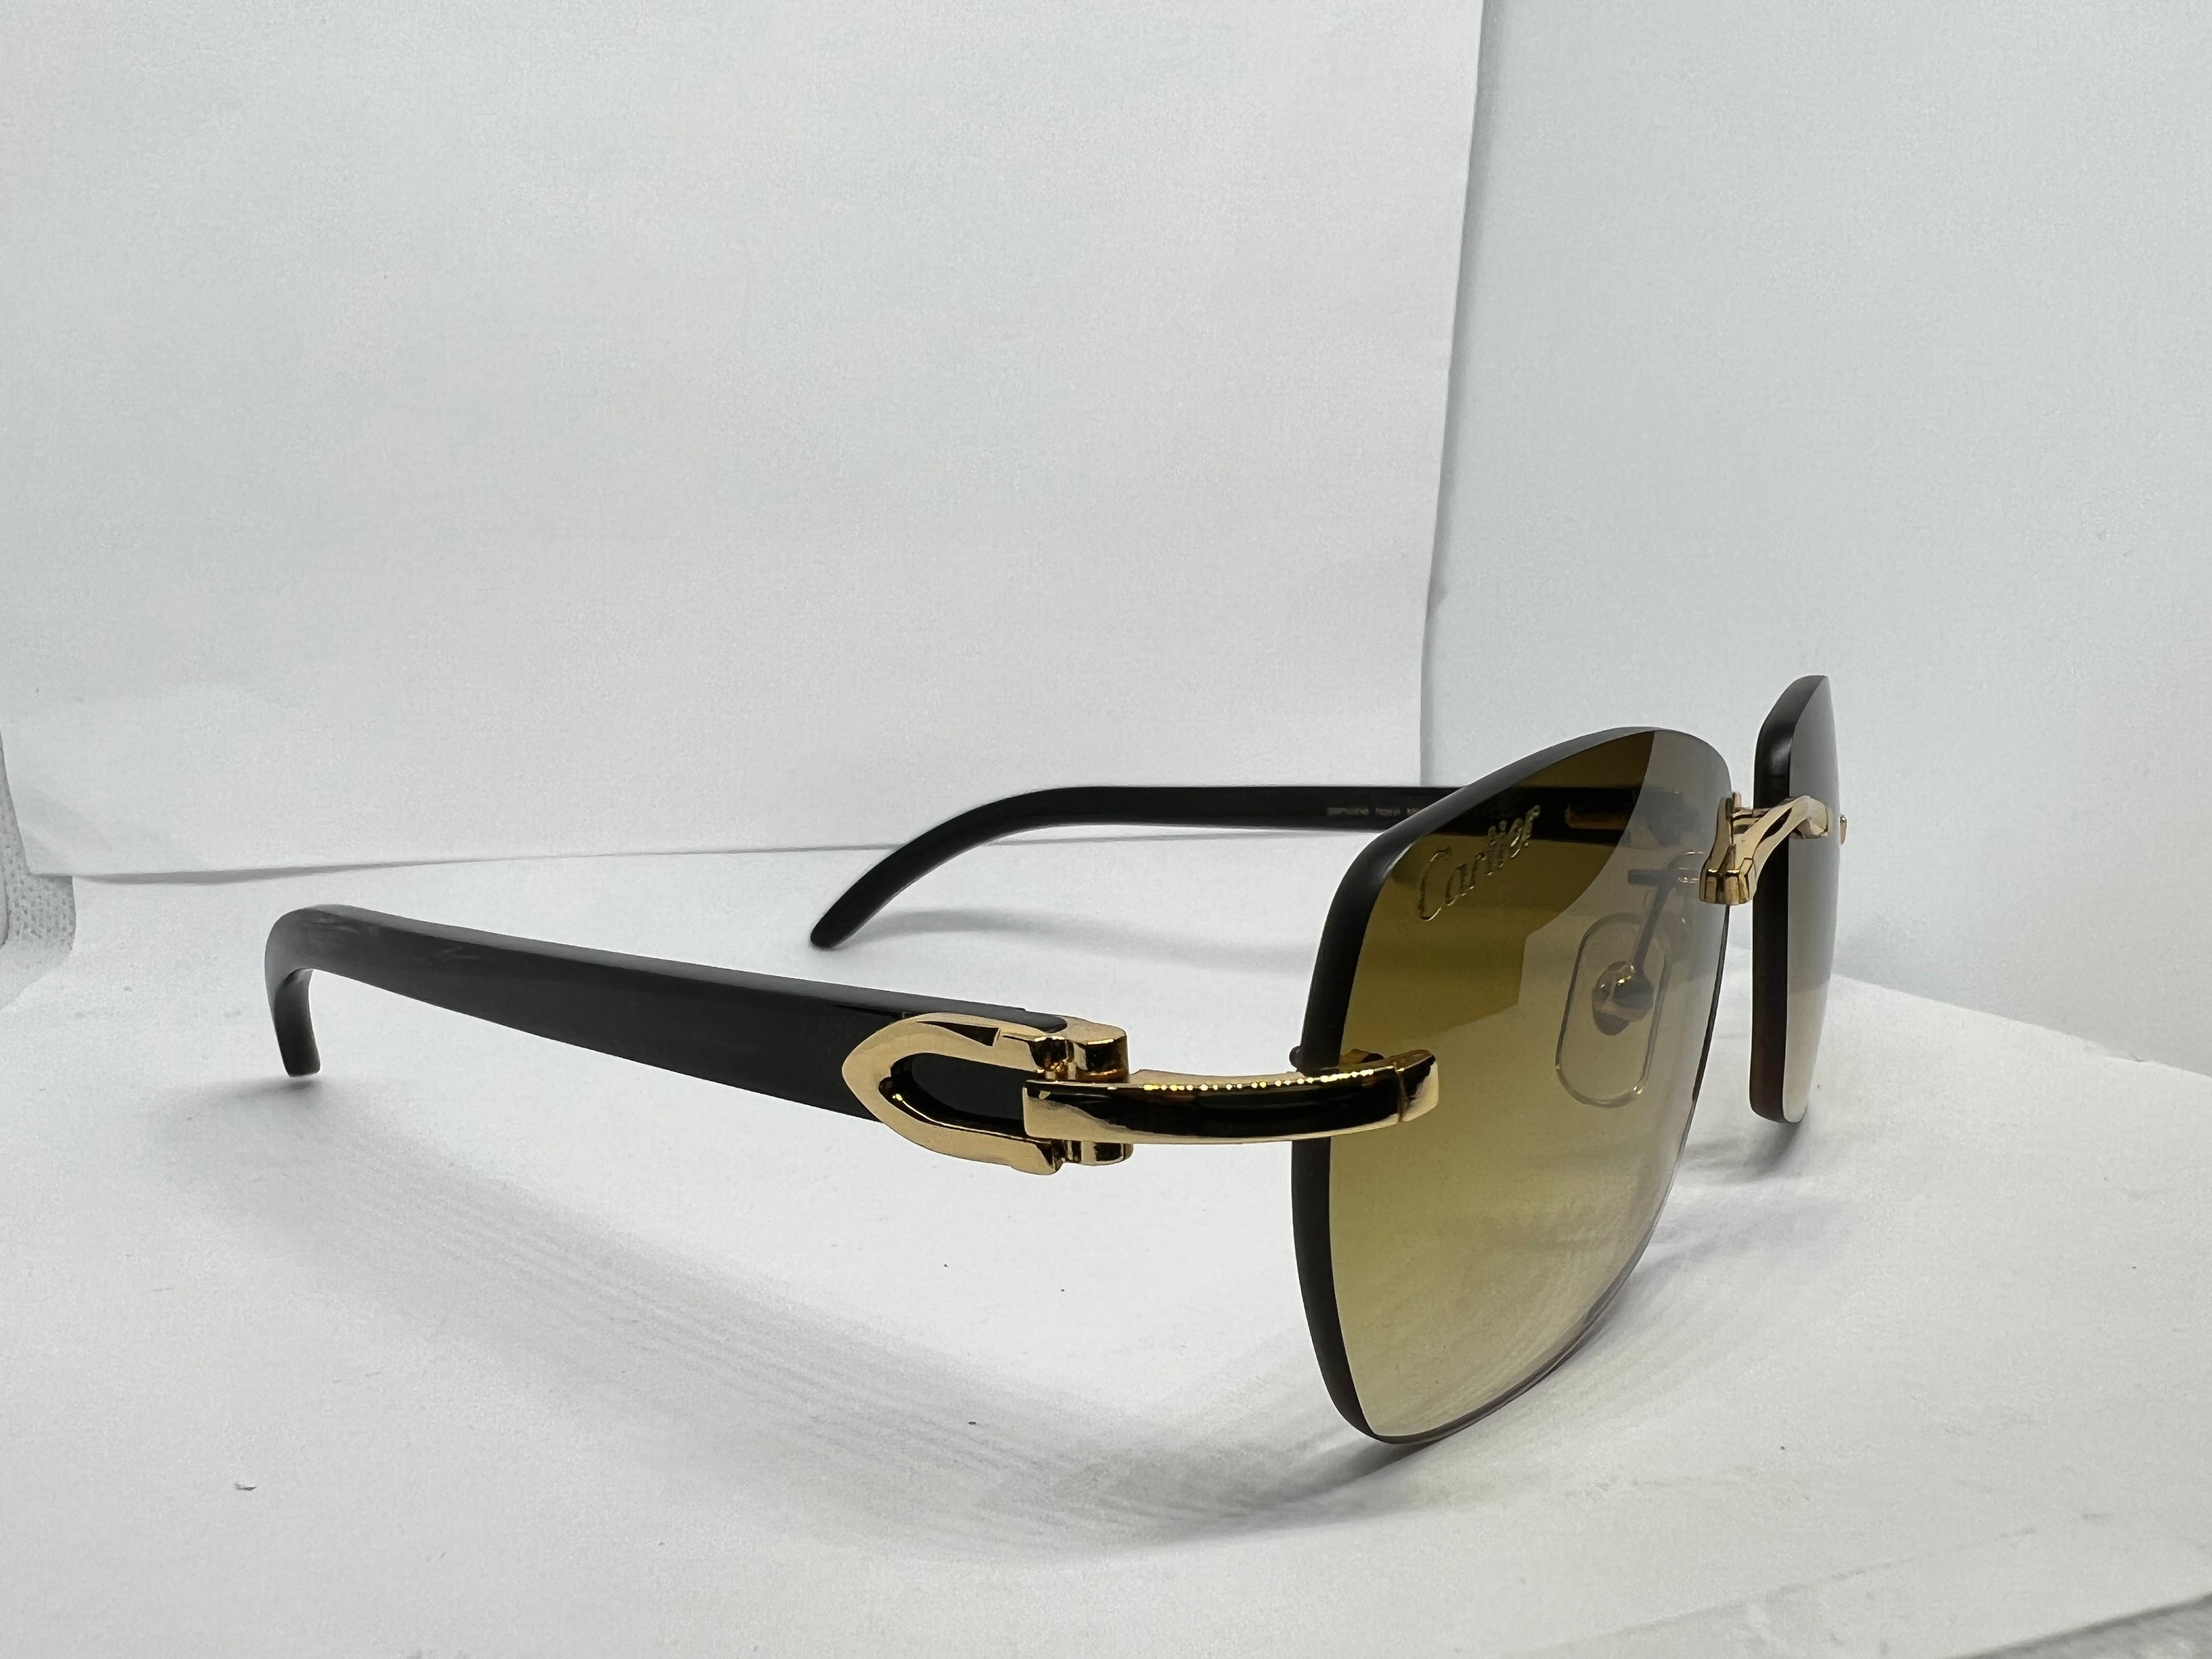 New Arrivals *** Classic Cartier Gold Frames w/ Olive Tinted Lenses